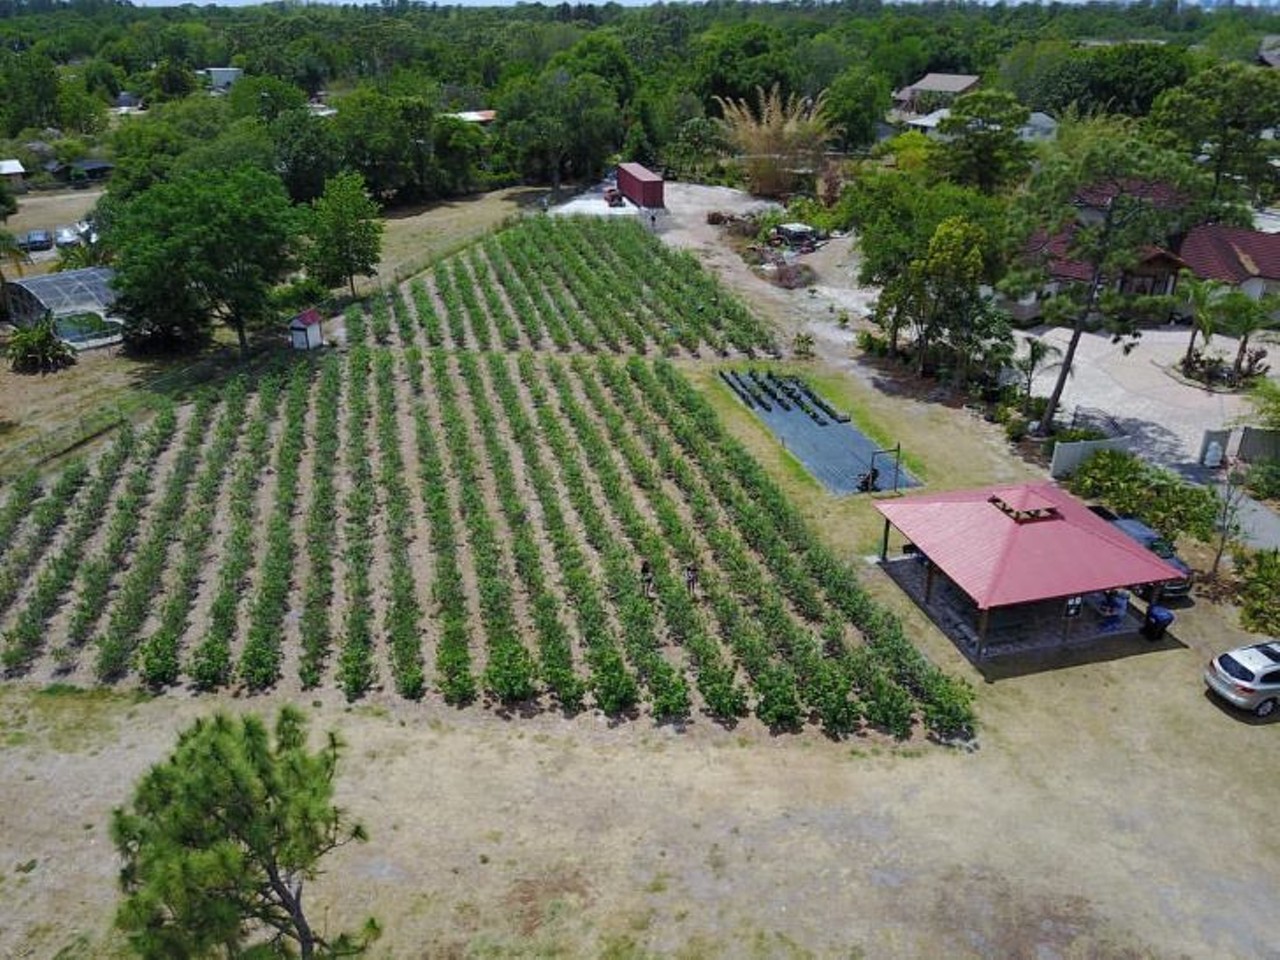 A Patch of Blue, LLC 
2316 Carrington Drive
This is a local community farm that sells home-grown blueberries and strawberries, smack in the middle of Orlando. No need to travel far to taste these delicious berries.
Photo via A Patch of Blue, LLC/Facebook